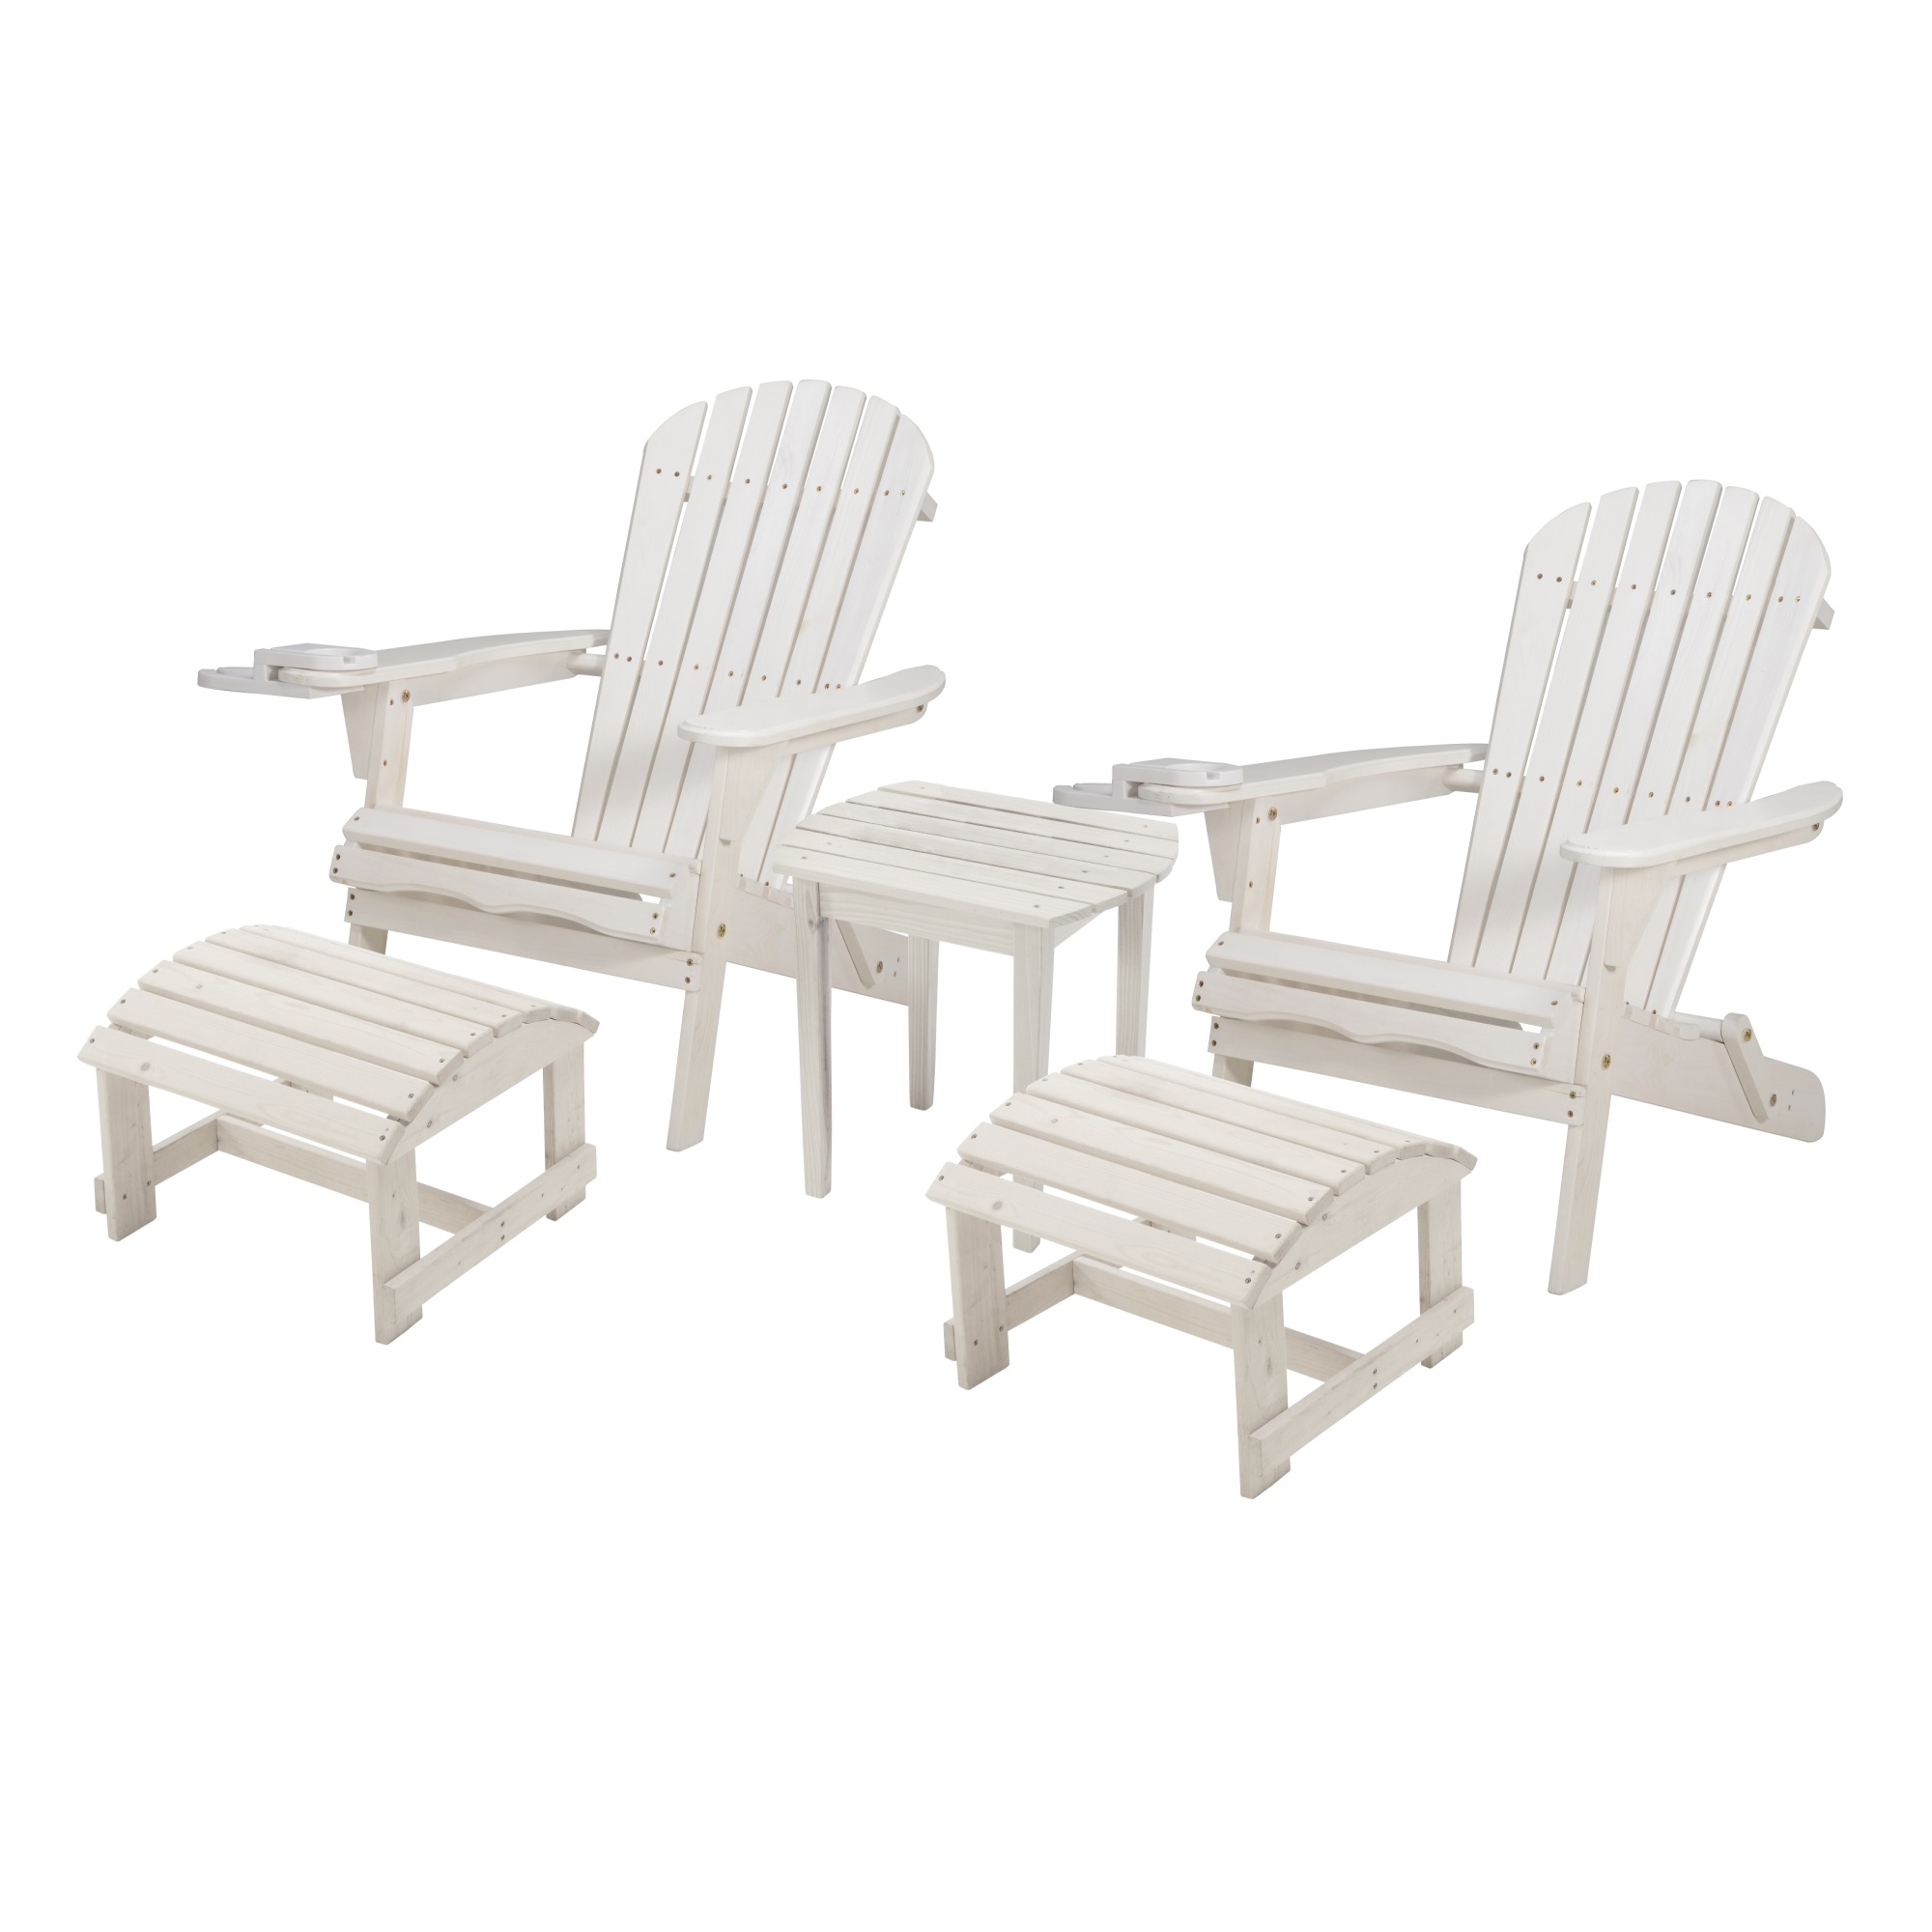 W Unlimited  33.75 x 33 x 27.75 in. 2 Foldable Chair with Ottoman & 1 End Table, White - image 1 of 2